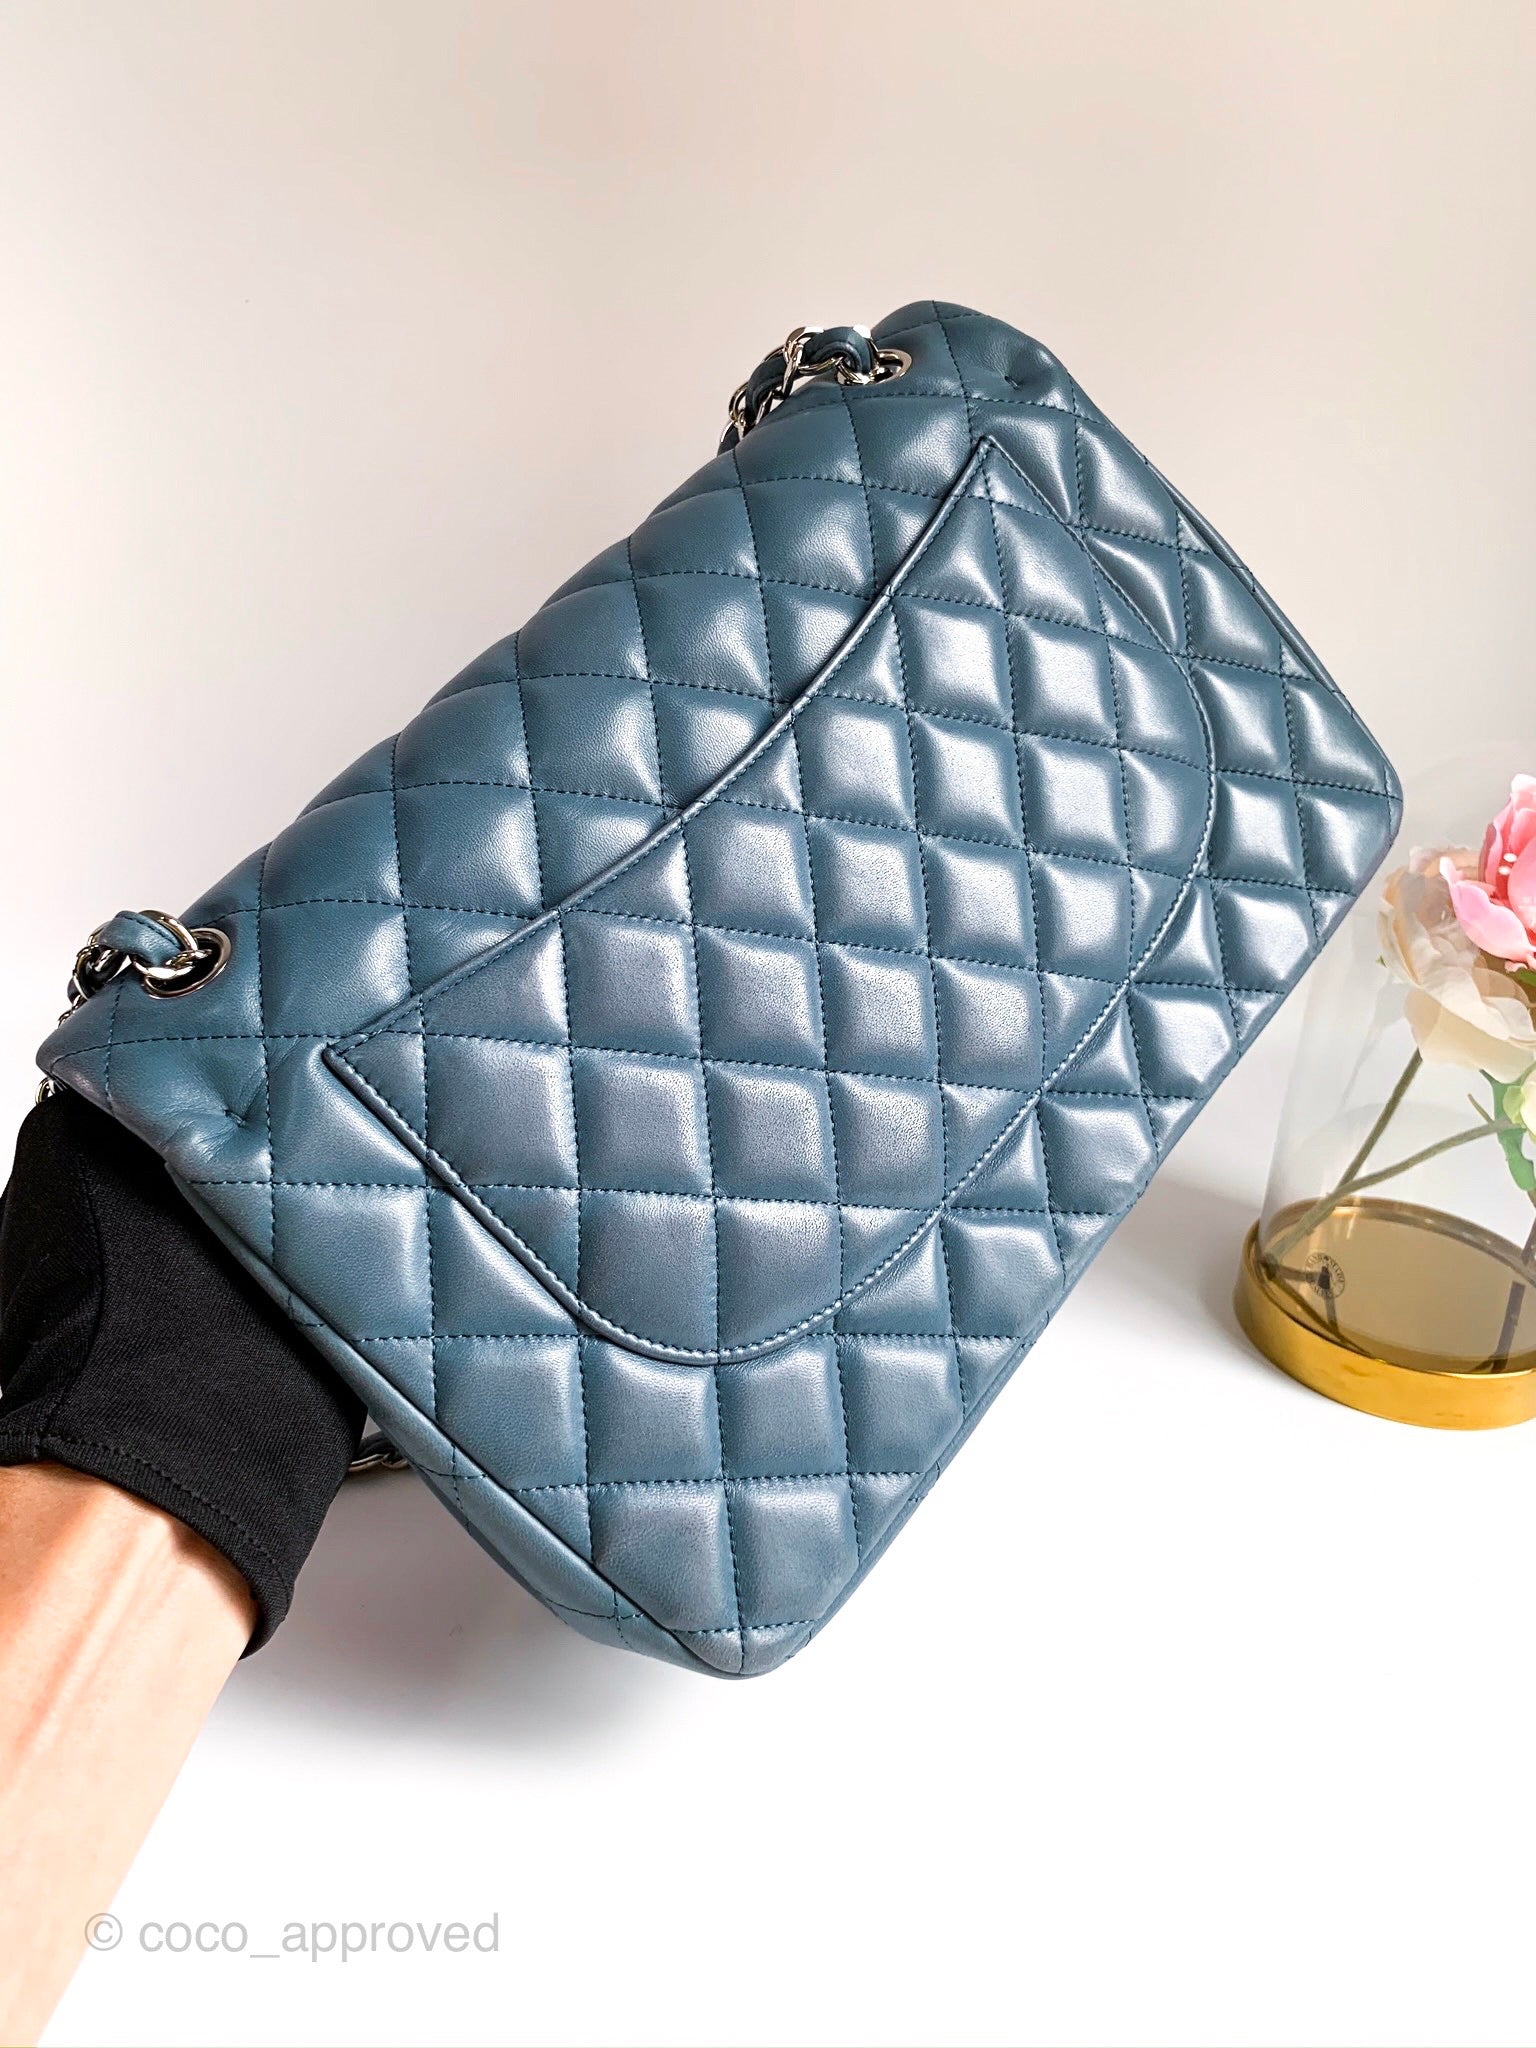 Chanel Sky Blue Quilted Iridescent Patent Leather Jumbo Classic